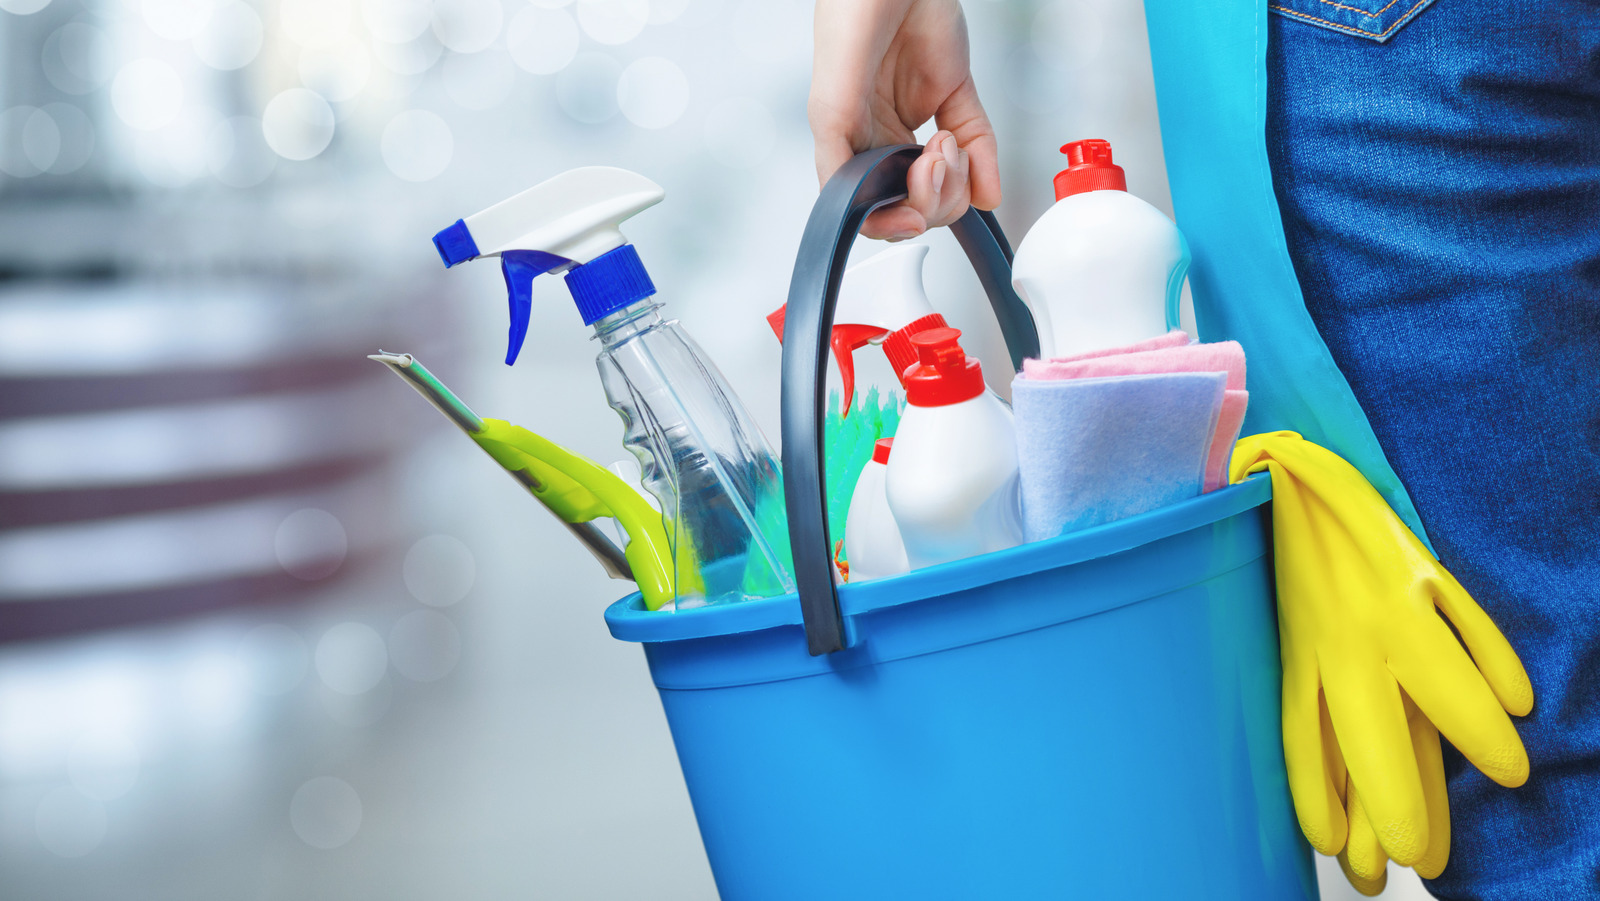 https://www.housedigest.com/img/gallery/can-your-household-cleaning-products-actually-expire/l-intro-1658849972.jpg